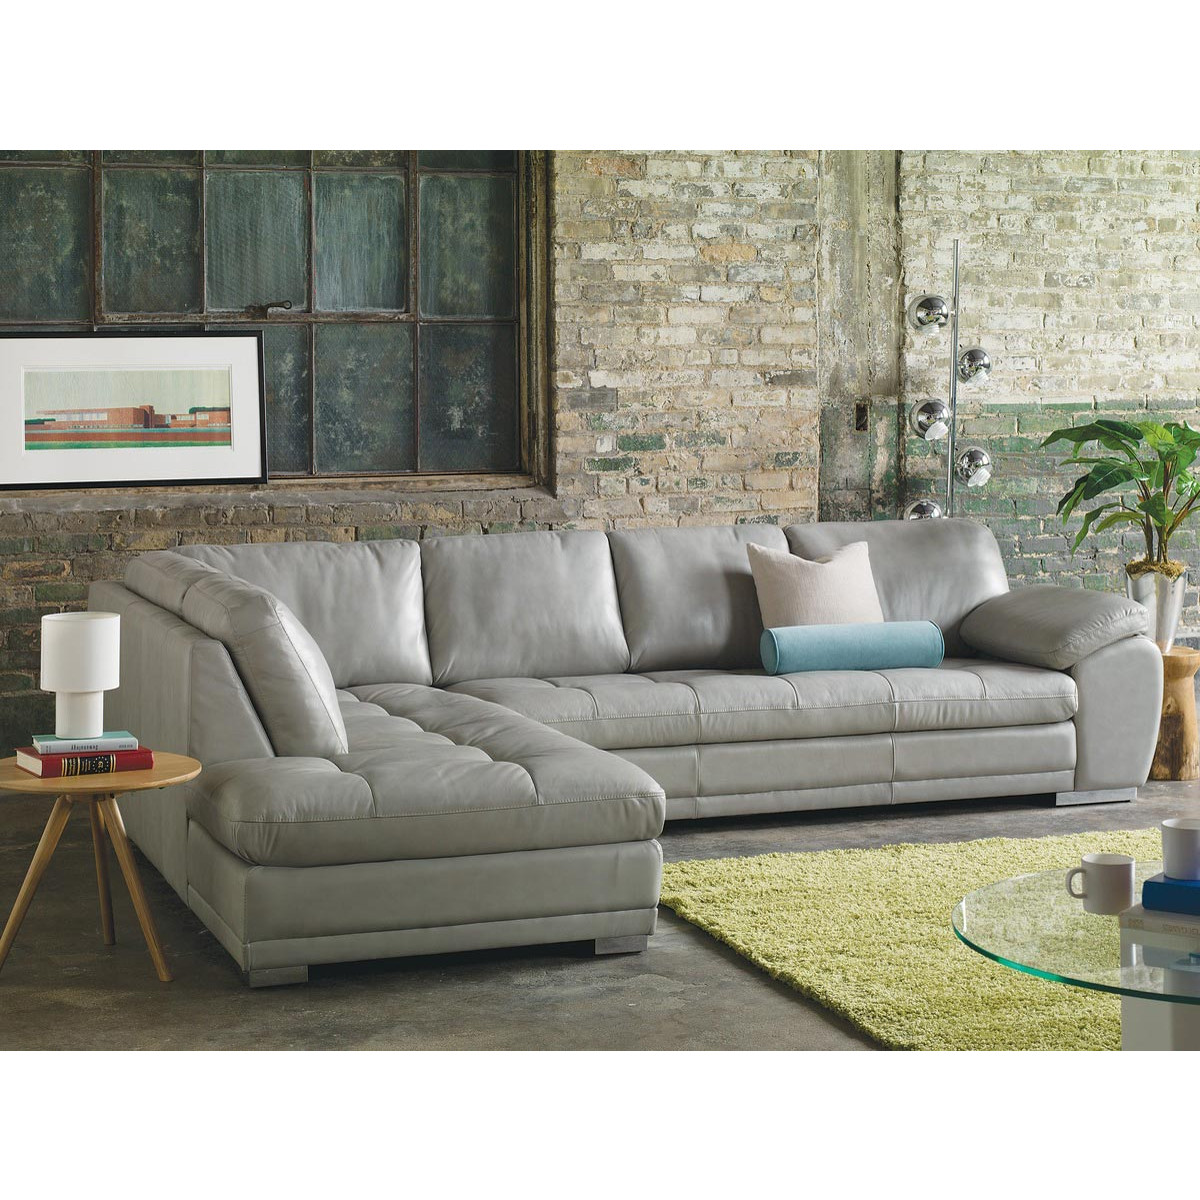 Palliser Miami Sectional From 1 968 00, Palliser Leather Sectionals